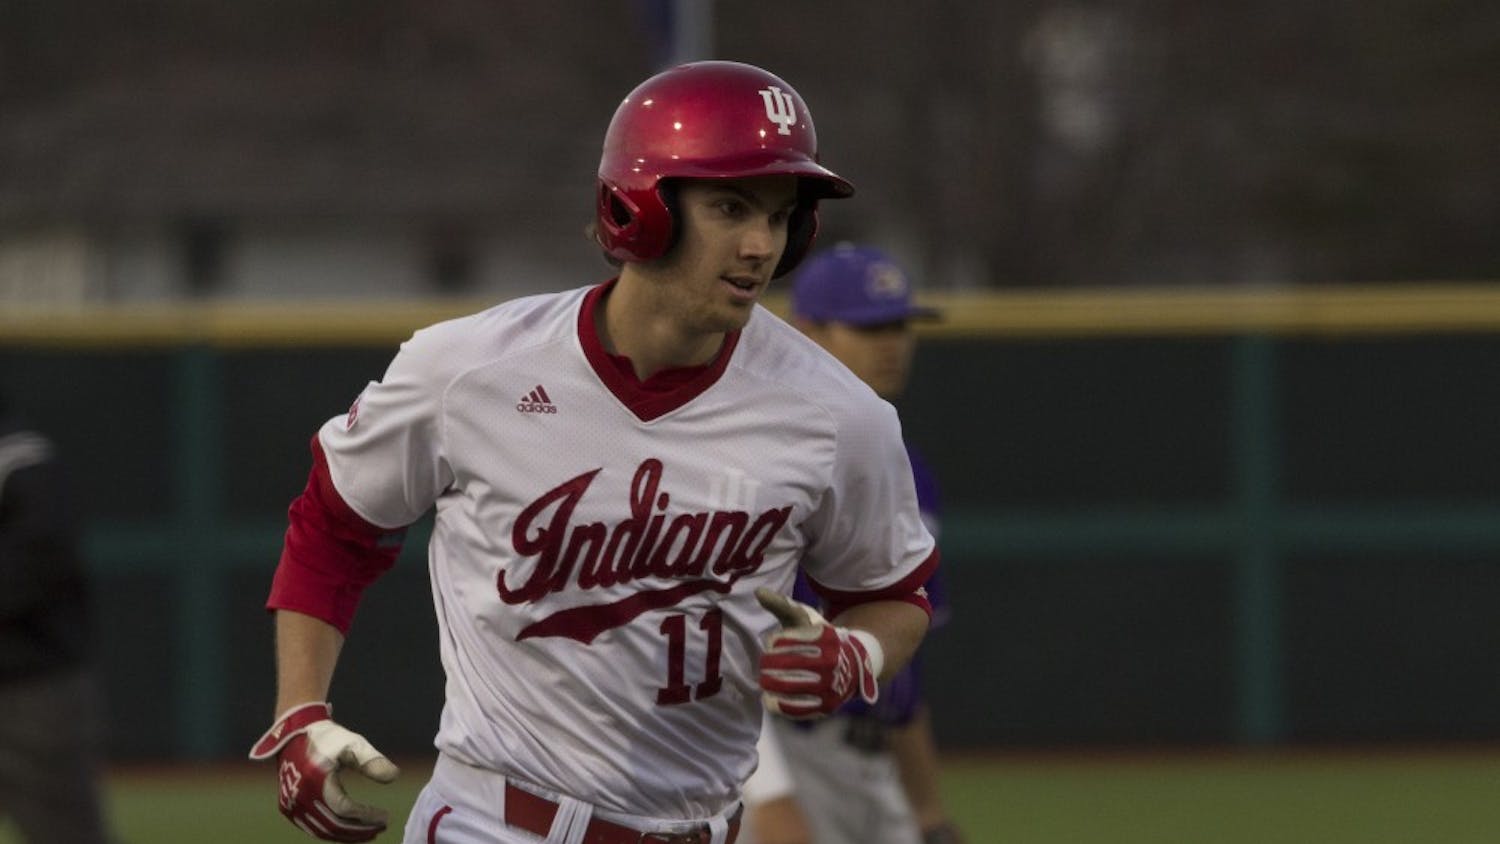 Shortstop Brian Wilhite jogs to homplate after his homerun during the seventh inning of play against Western Carolina University on Friday night. The Hoosiers won 3-2.